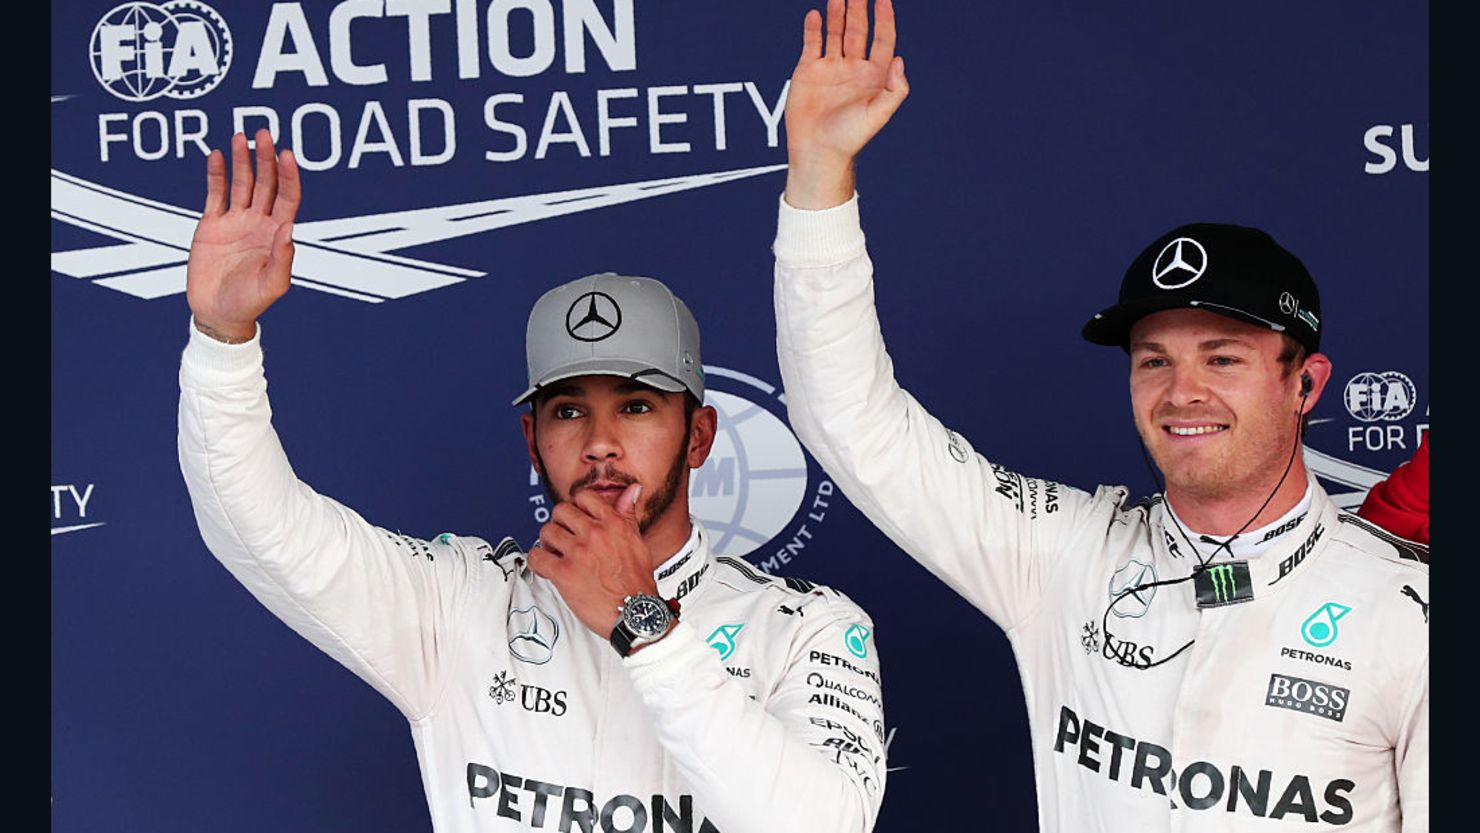 Lewis Hamilton (left) trails Nico Rosberg by 23 points with five races remaining.